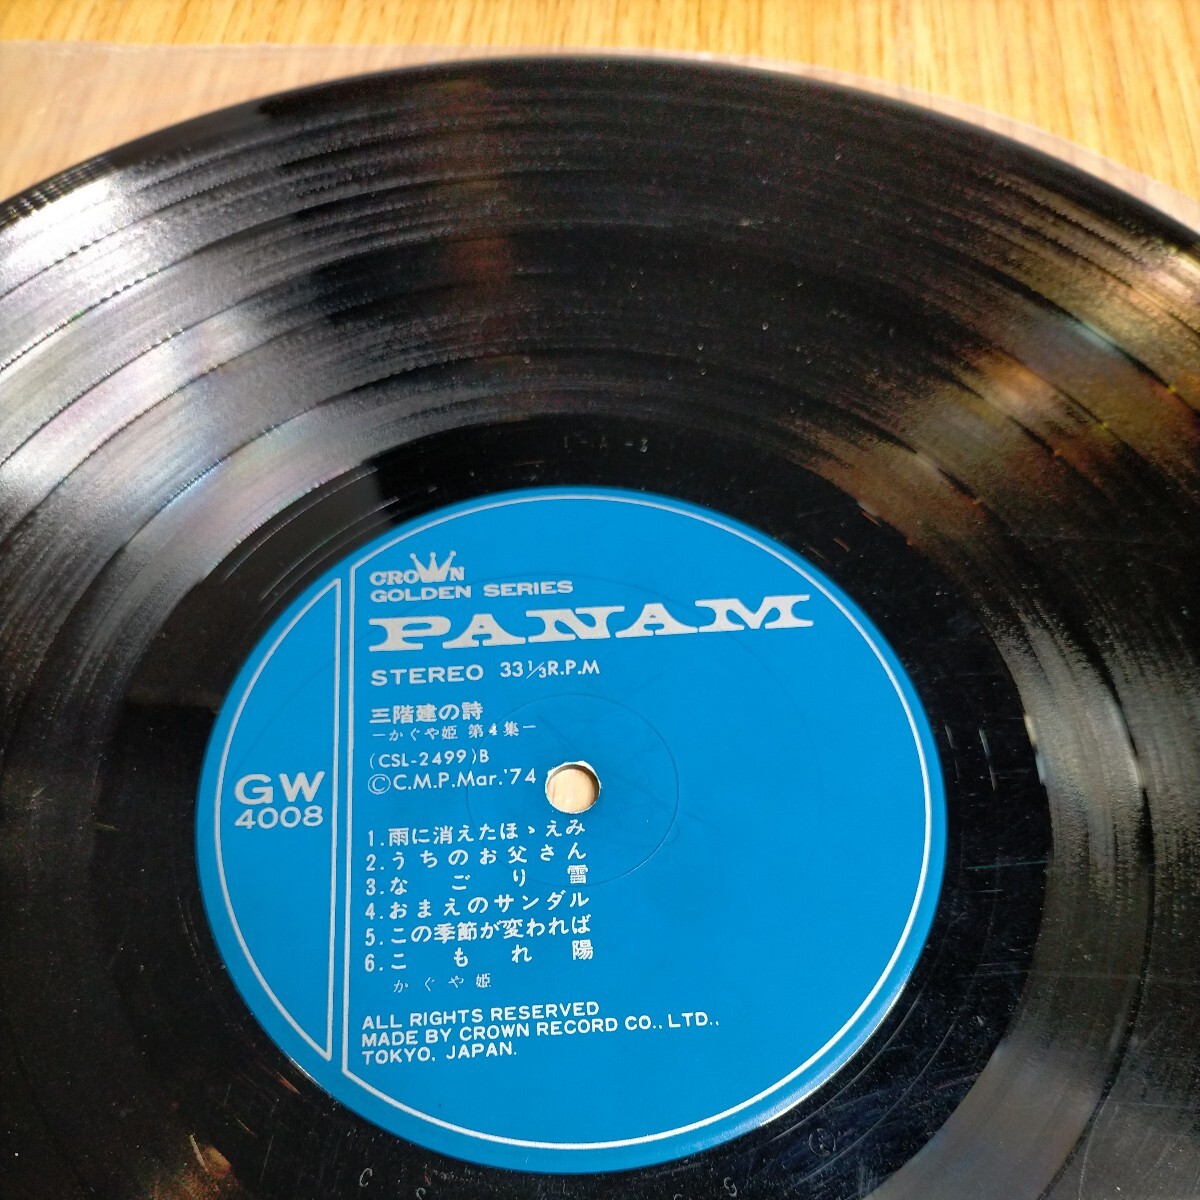 H1561 Kaguya Hime three floor .. poetry LP record LP record Japanese music music Showa Retro pops pop song Showa era song City pop JPOP postage nationwide equal 510 jpy 